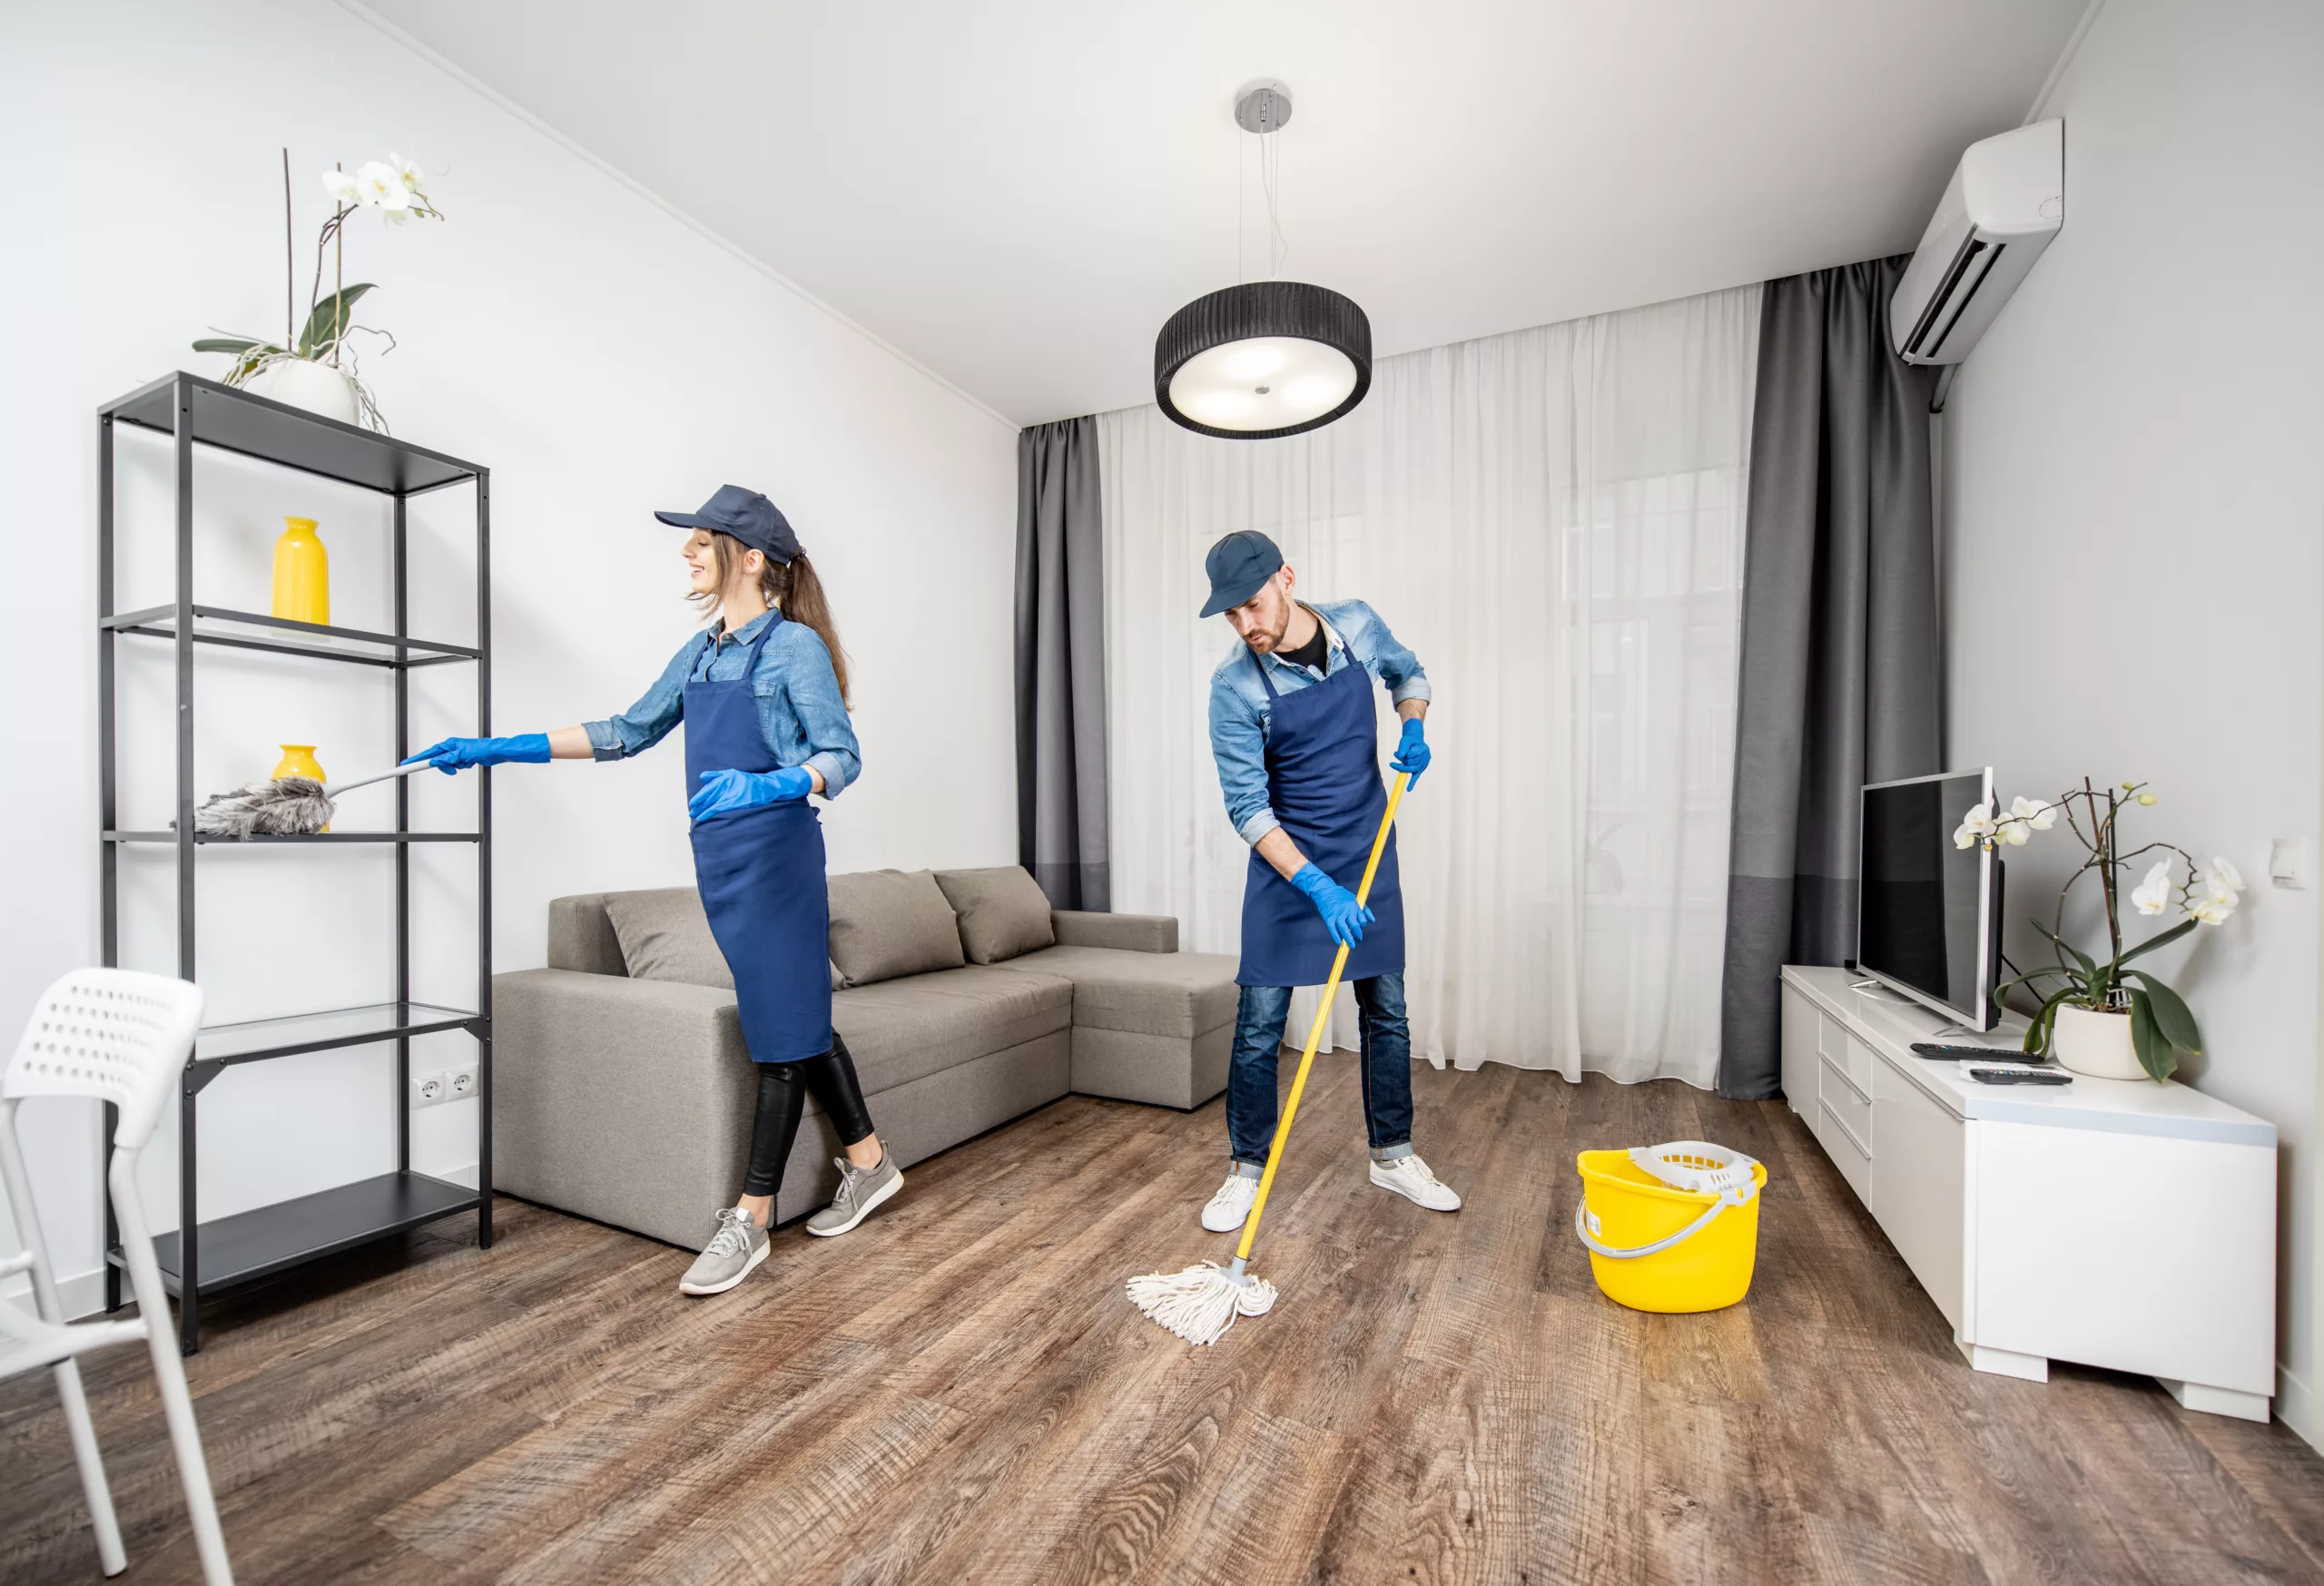 House cleaning service experts in blue uniform washing floor and wiping dust from the furniture in the living room of the apartment.